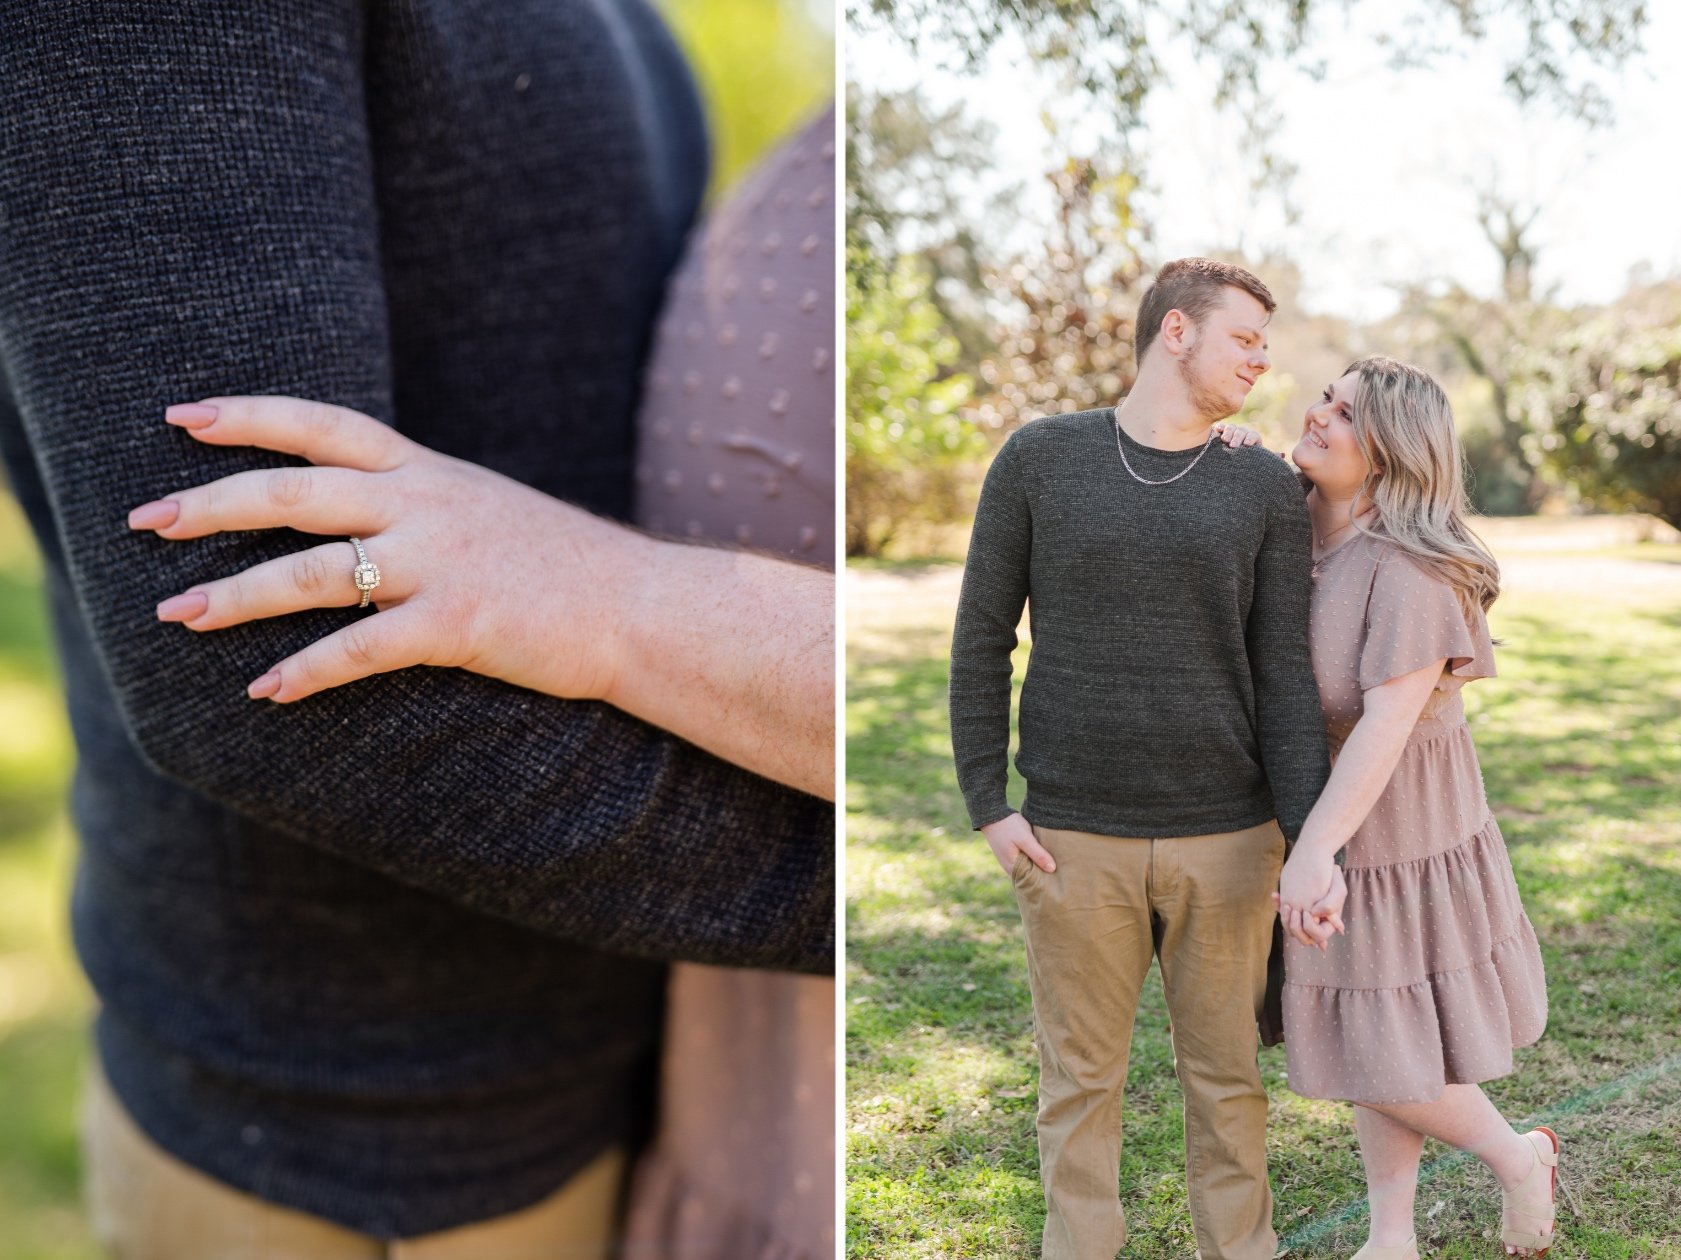 Spring Hill College Engagement Session in Mobile, AL Photographed by Kristen Marcus Photography